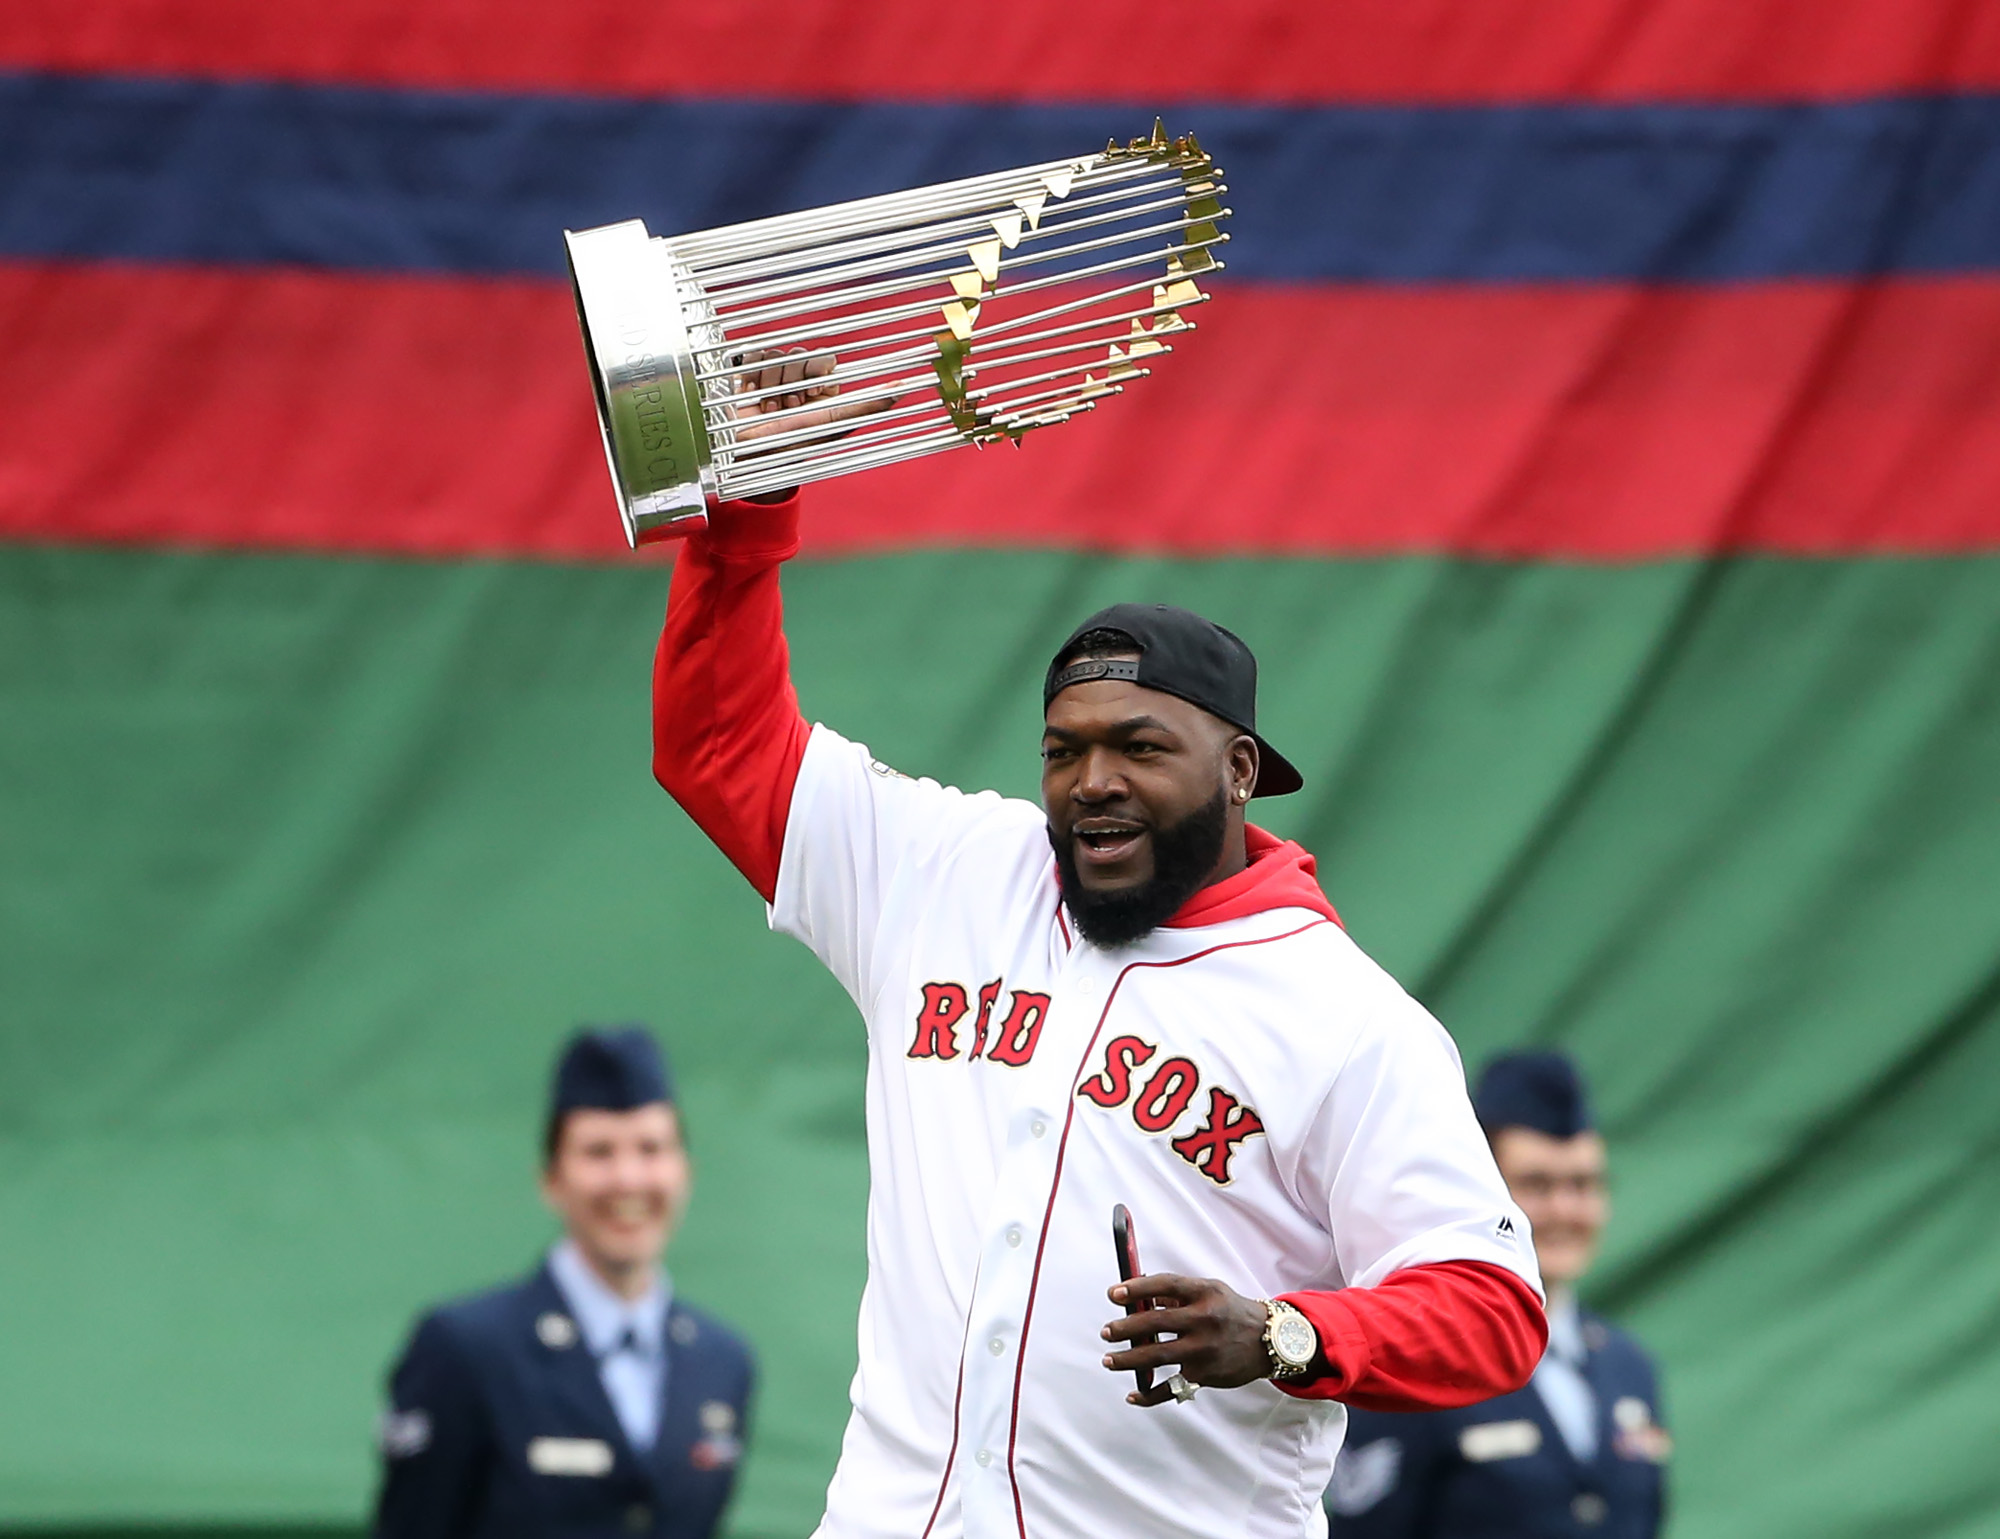 Former Red Sox player David Ortiz carries a World Series trophy onto the field.